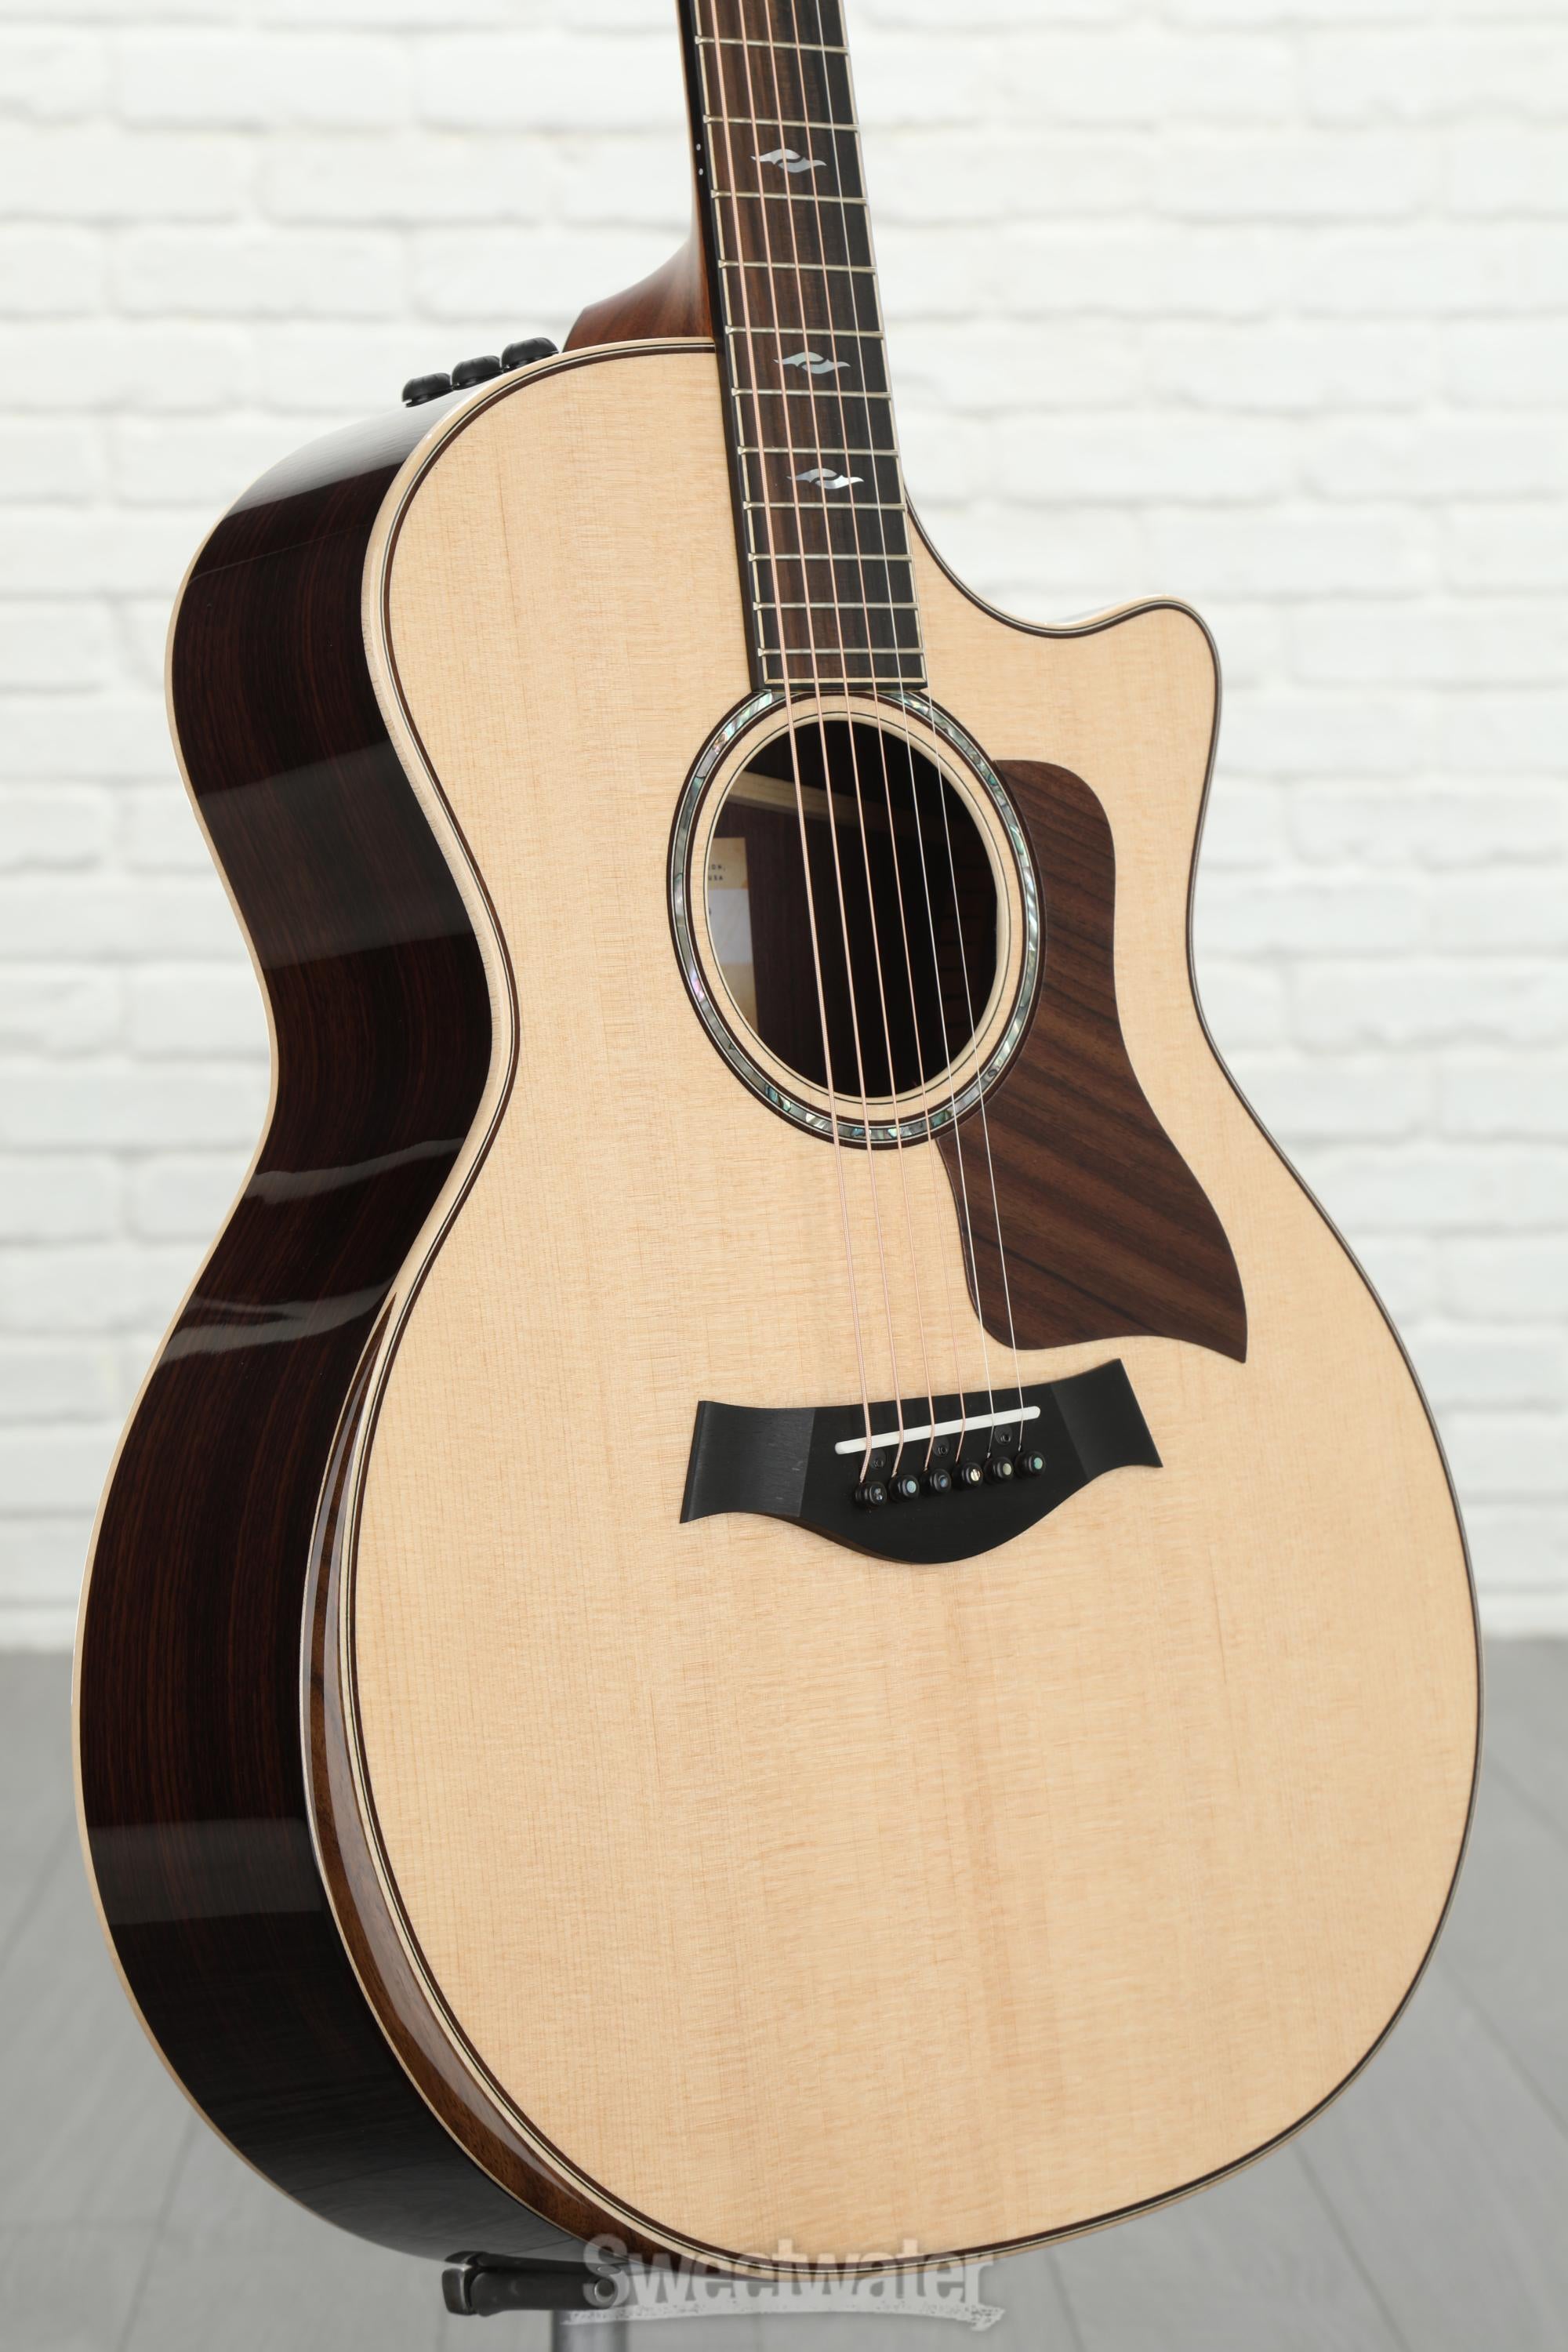 Taylor 814ce Deluxe V-Class Acoustic-Electric Guitar - Natural